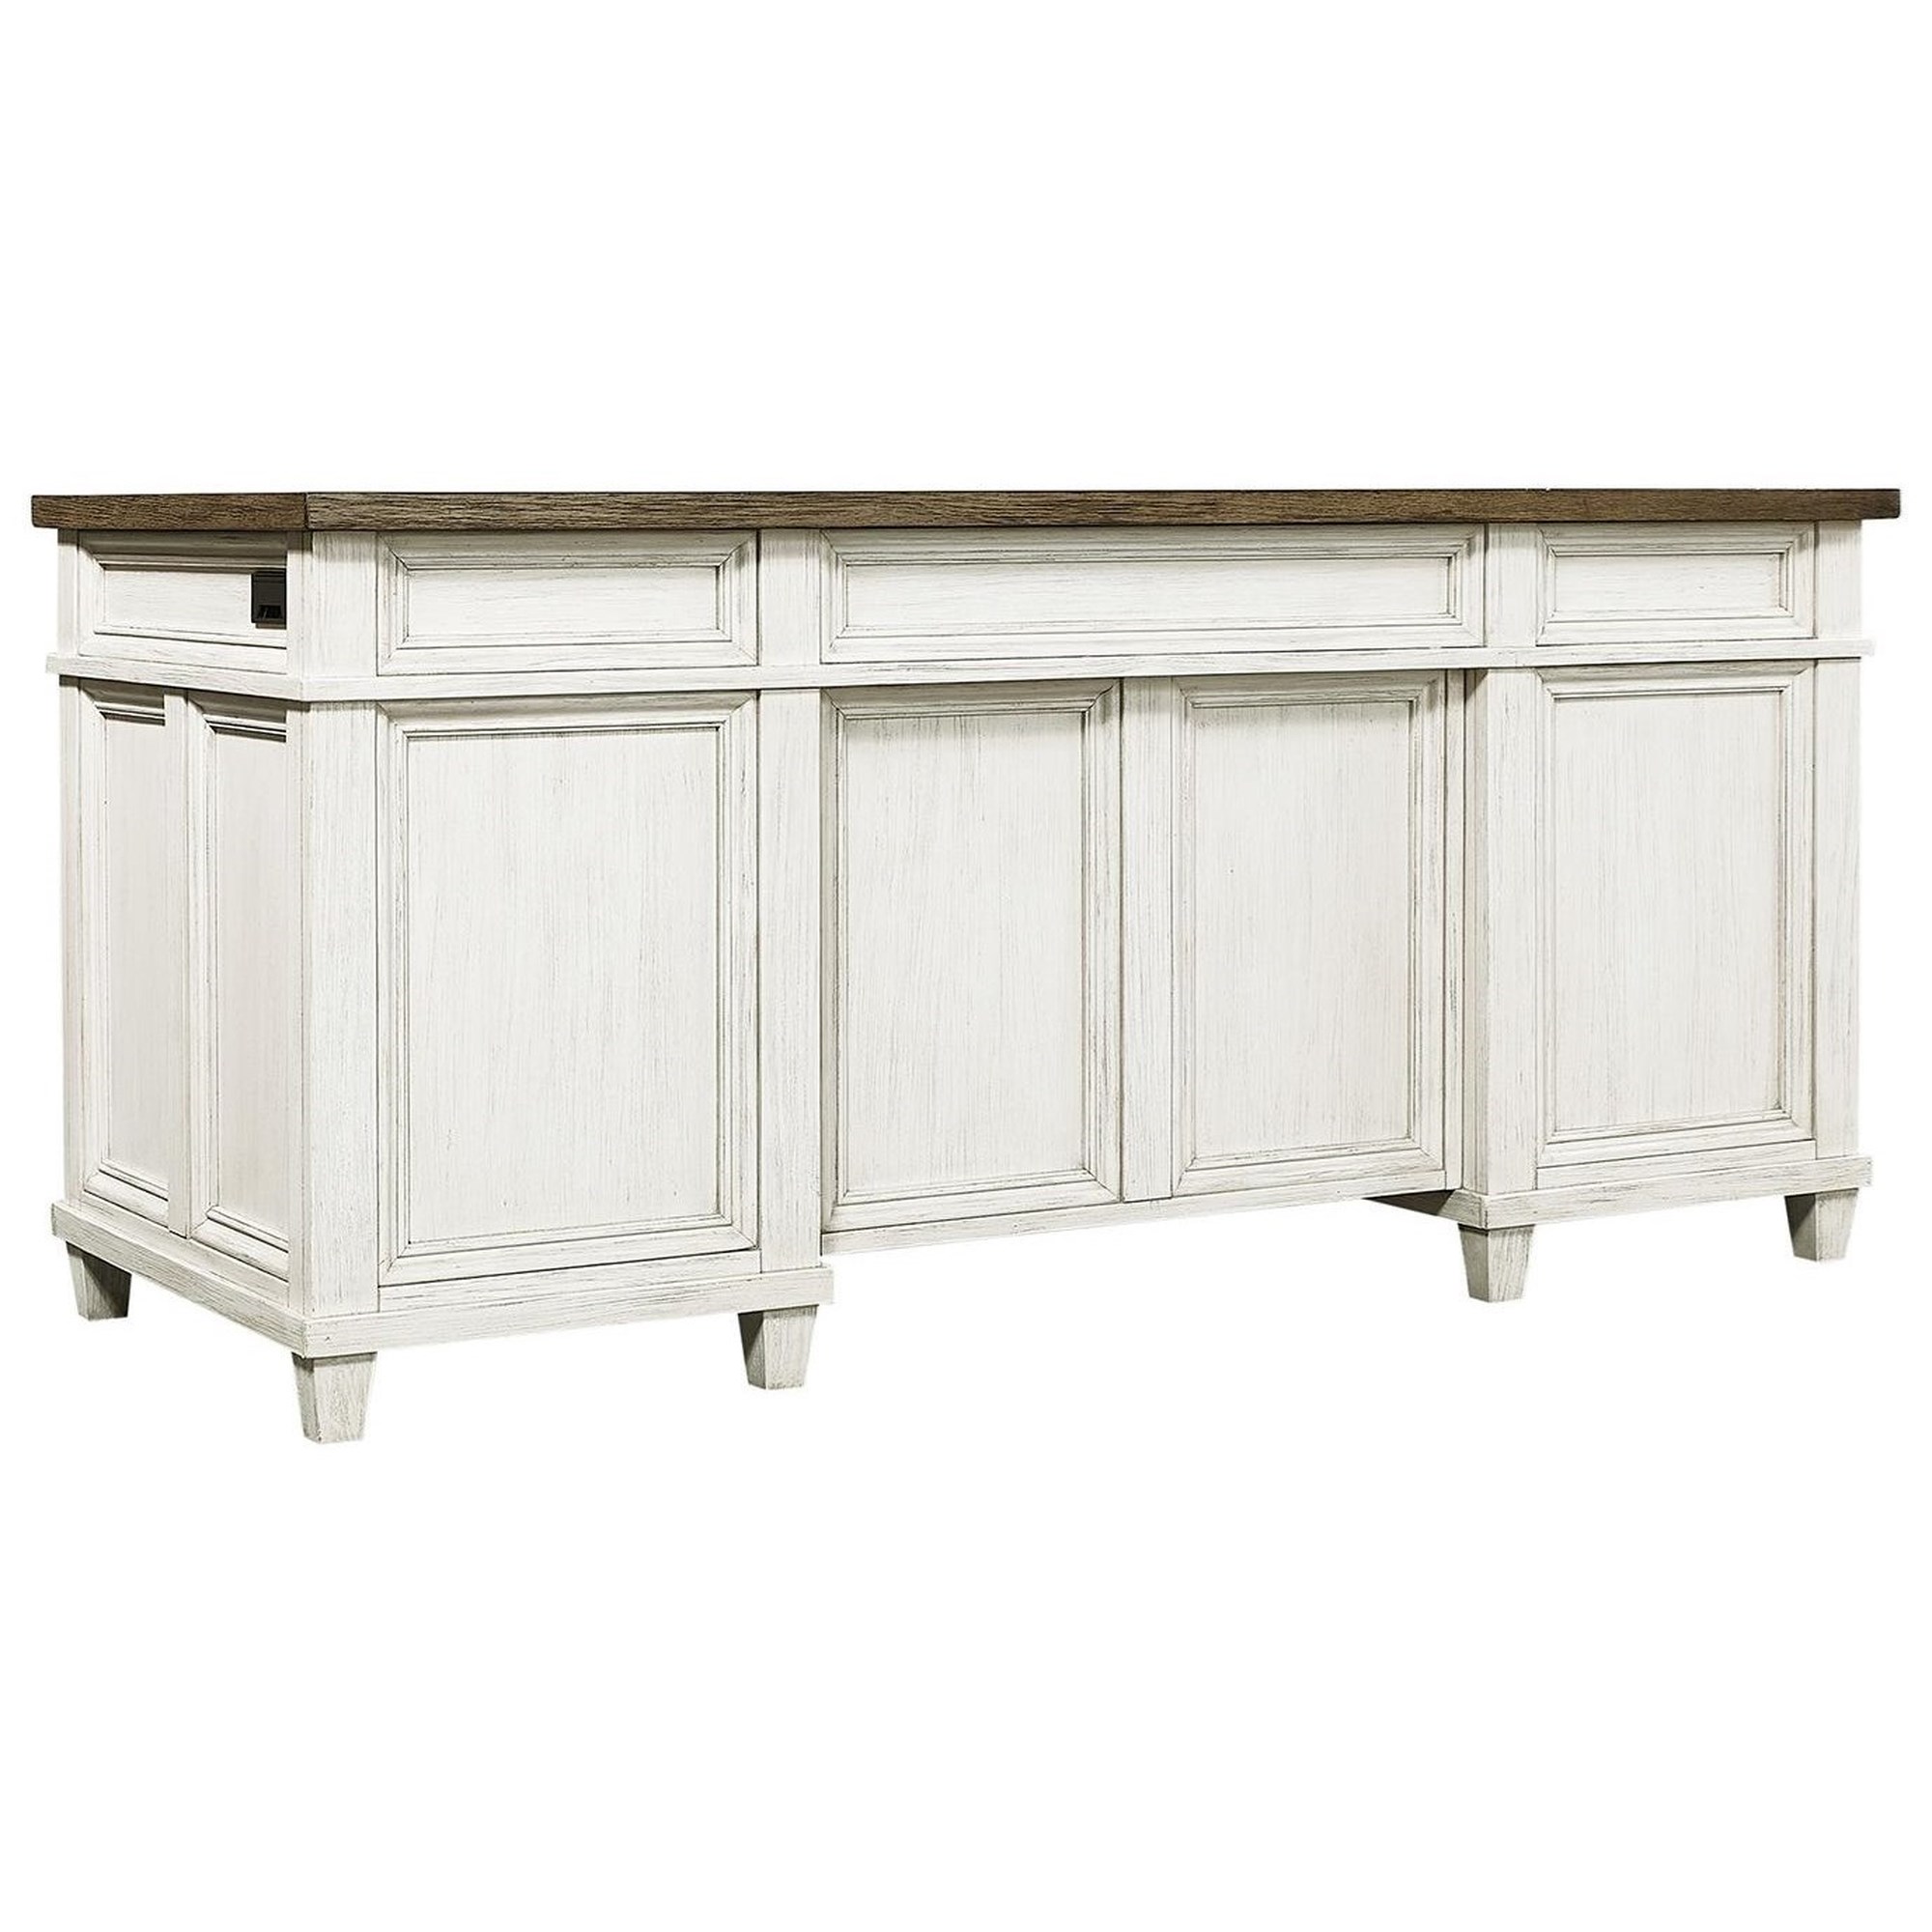 CARAWAY Home Deals, Sale & Clearance